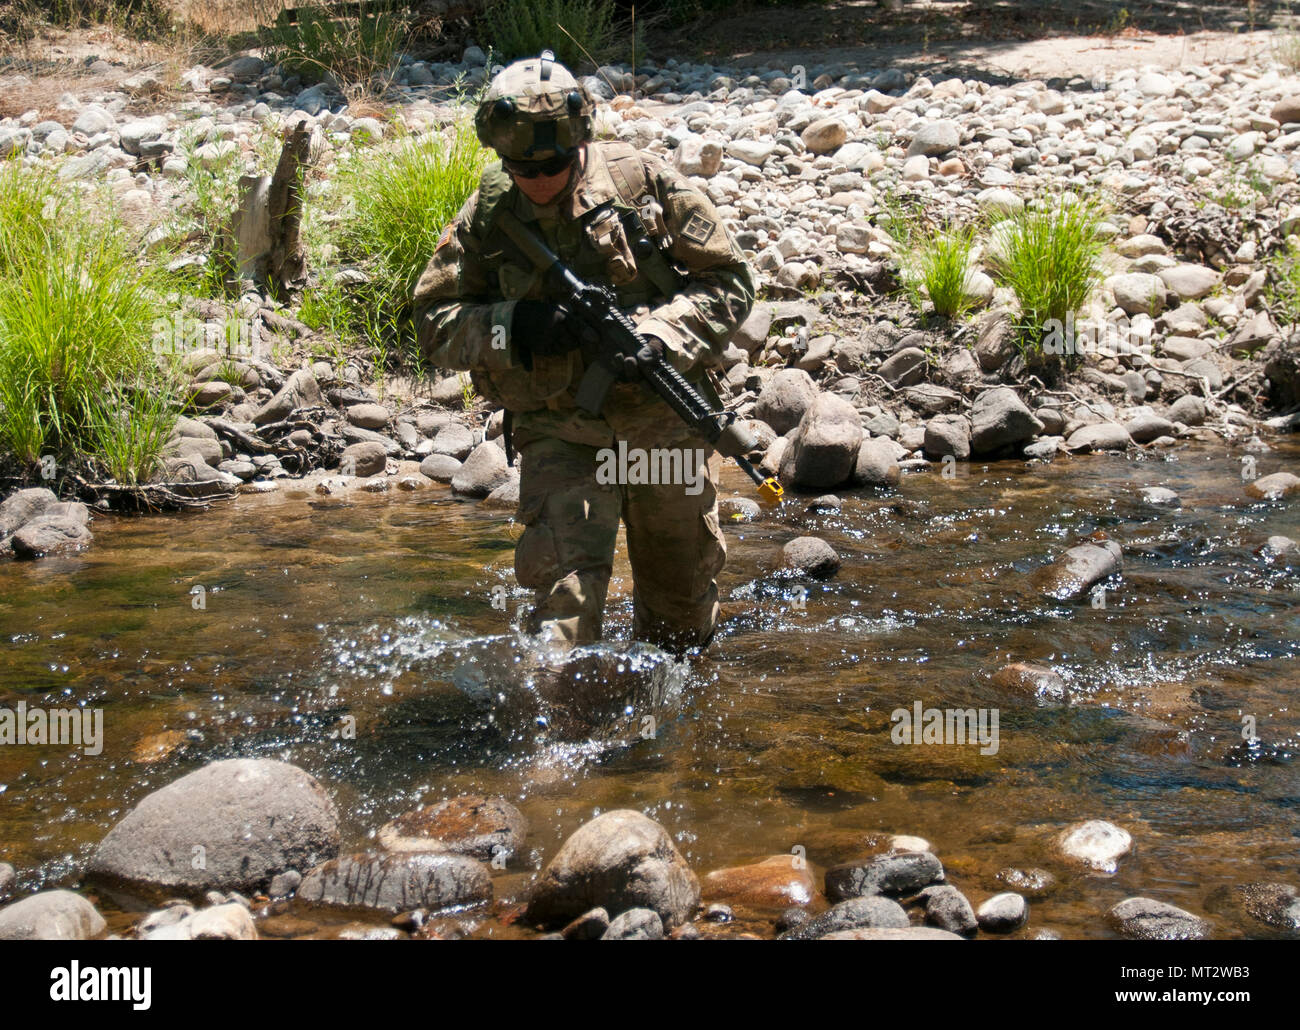 Pfc. Austin Broadway crosses a stream while maneuvering to an observation post near the 718th Engineer Company's command post during training on Fort Hunter Liggett, Calif., on July 19, 2017. The 718th is an Army Early Response Force unit, capable of deploying within 30 days of notification to support any combatant command in the world. Nearly 5,400 service members from the U.S. Army Reserve Command, U.S. Army, Army National Guard, U.S. Navy, and Canadian Armed Forces are training at Fort Hunter Liggett as part of the 84th Training Command’s CSTX 91-17-03 and ARMEDCOM’s Global Medic; this is a Stock Photo